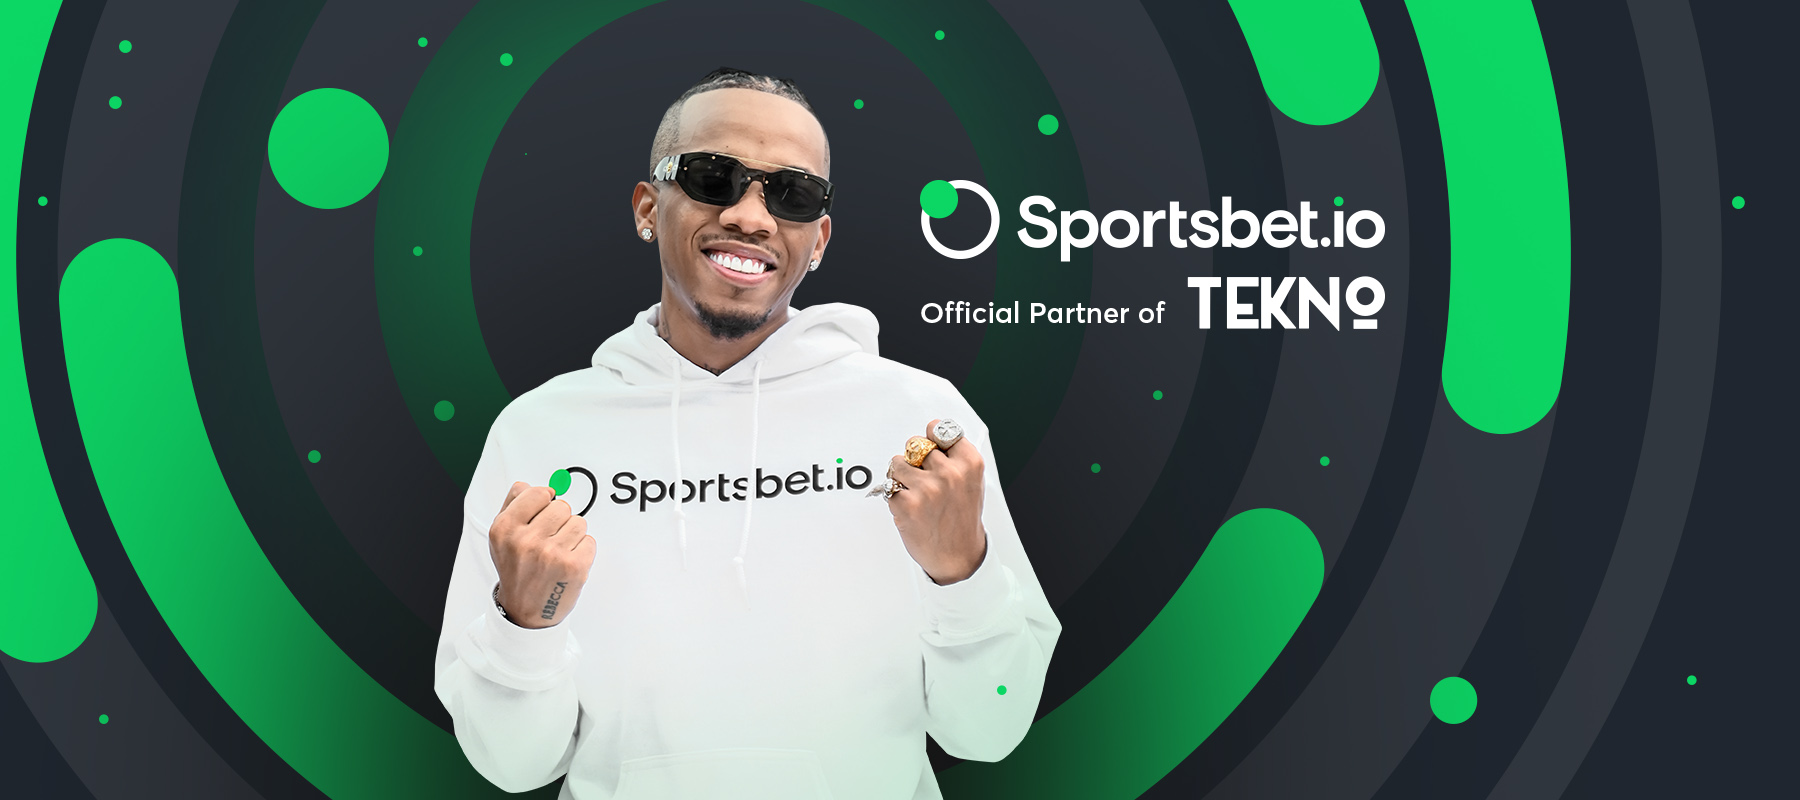 Sportsbet.io unveils latest signing with Tekno Miles joining as global ambassador